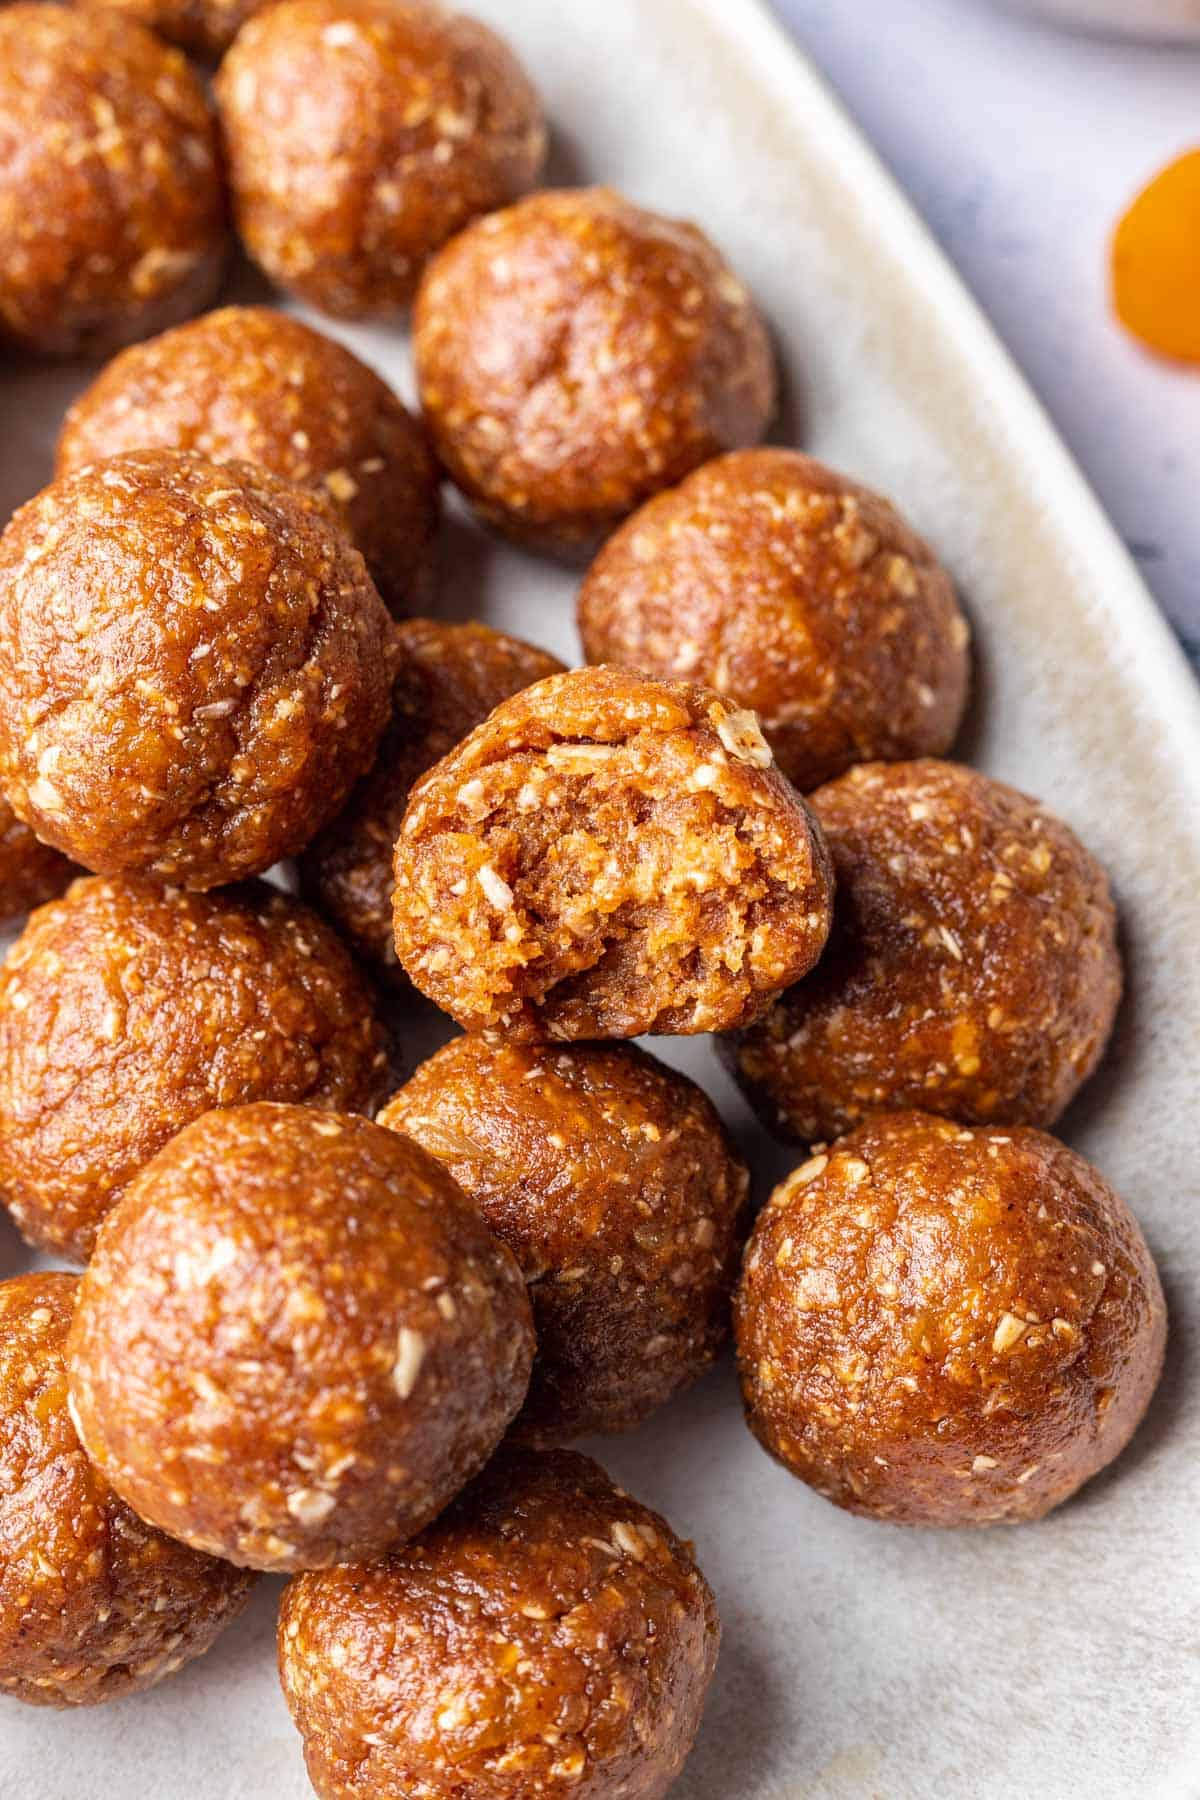 Apricot bliss balls stacked on a platter.